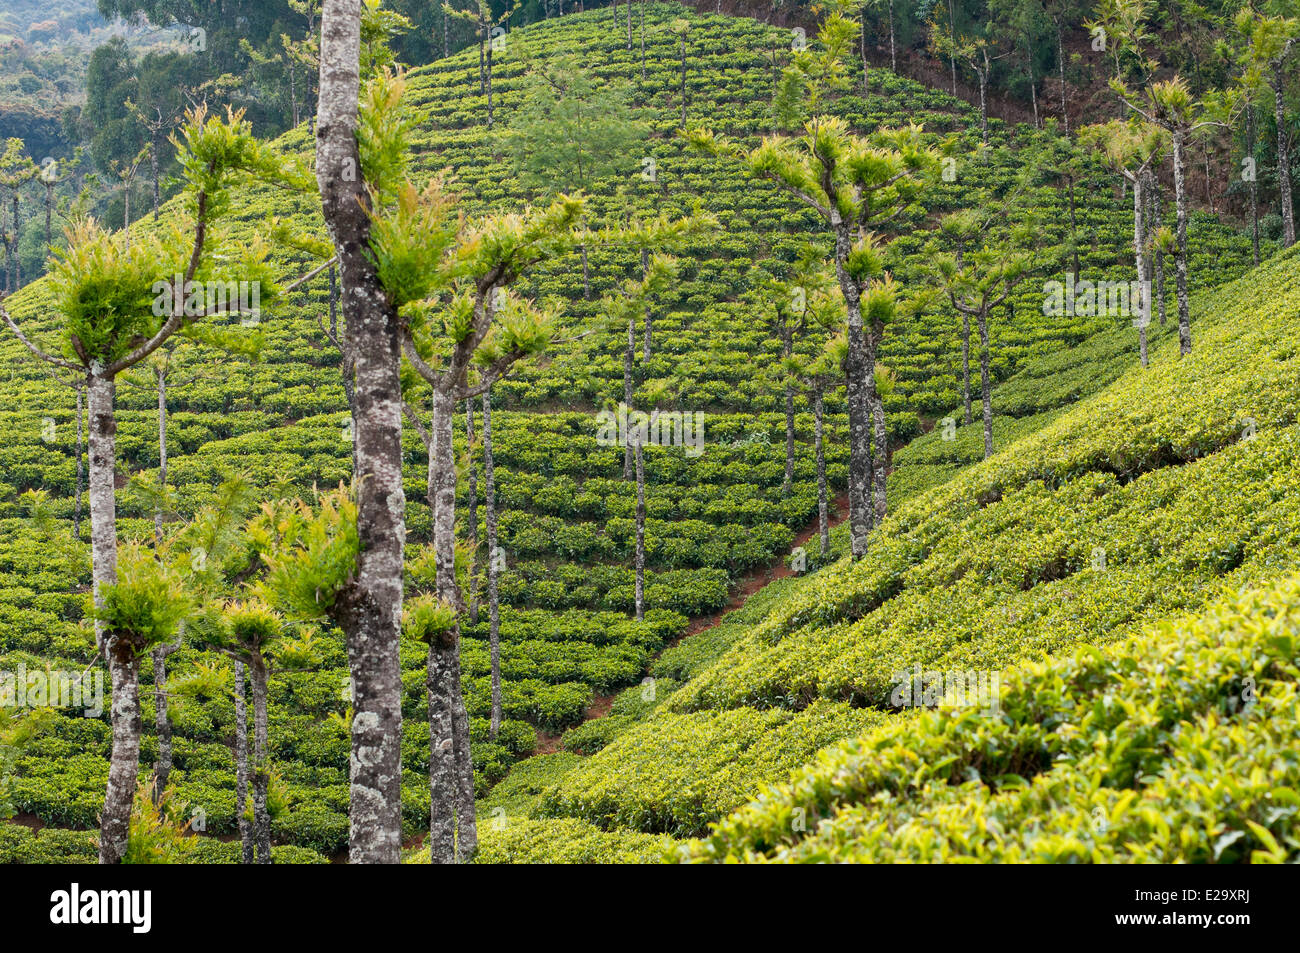 India, Tamil Nadu State, Ooty, a hill station in the Nilgiri Hills (Blue Hills) at an altitude of 2200m founded by the Stock Photo